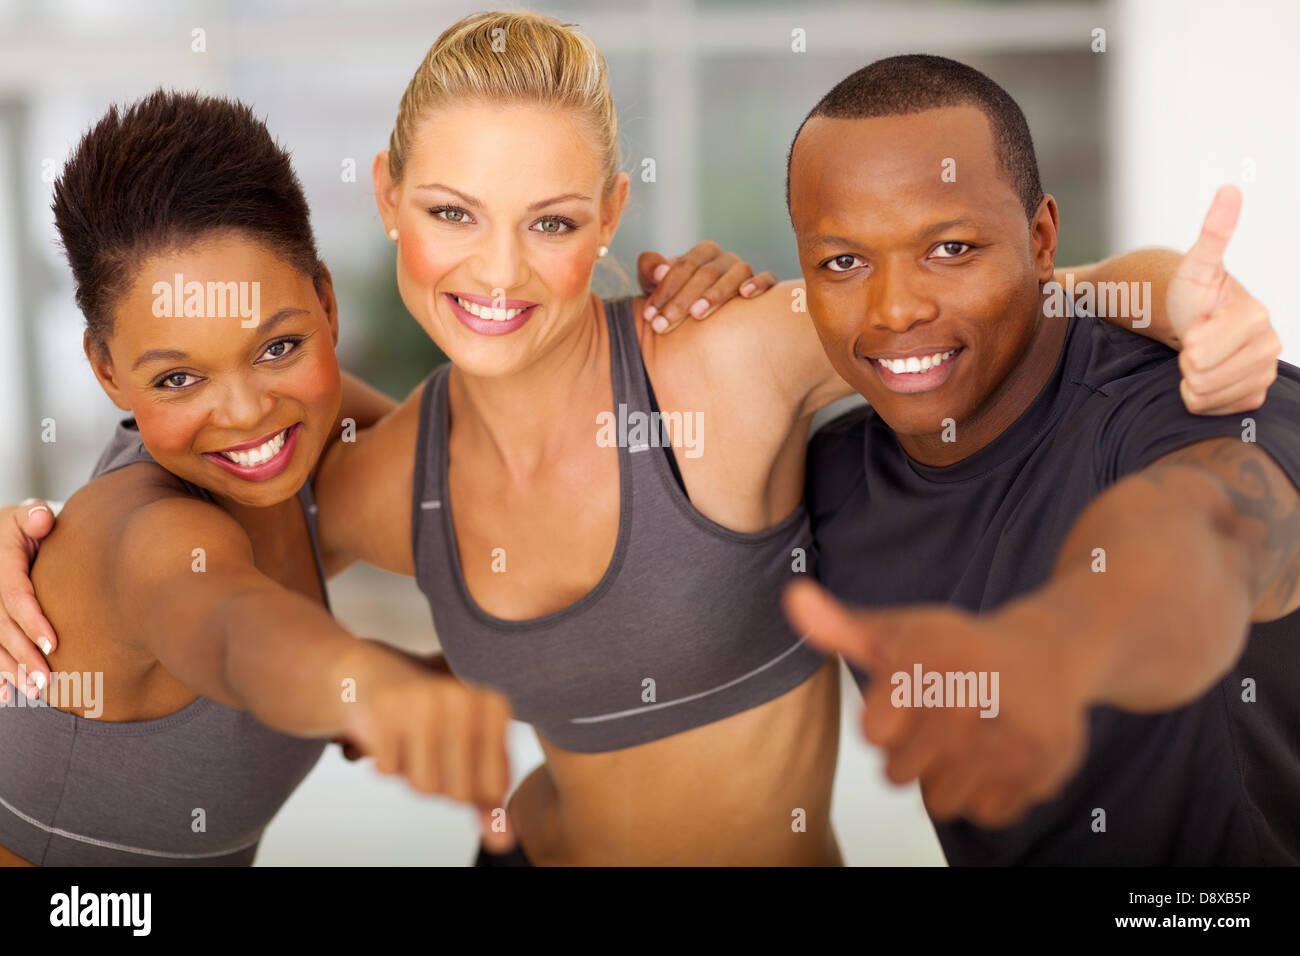 happy gym team giving thumbs up Stock Photo